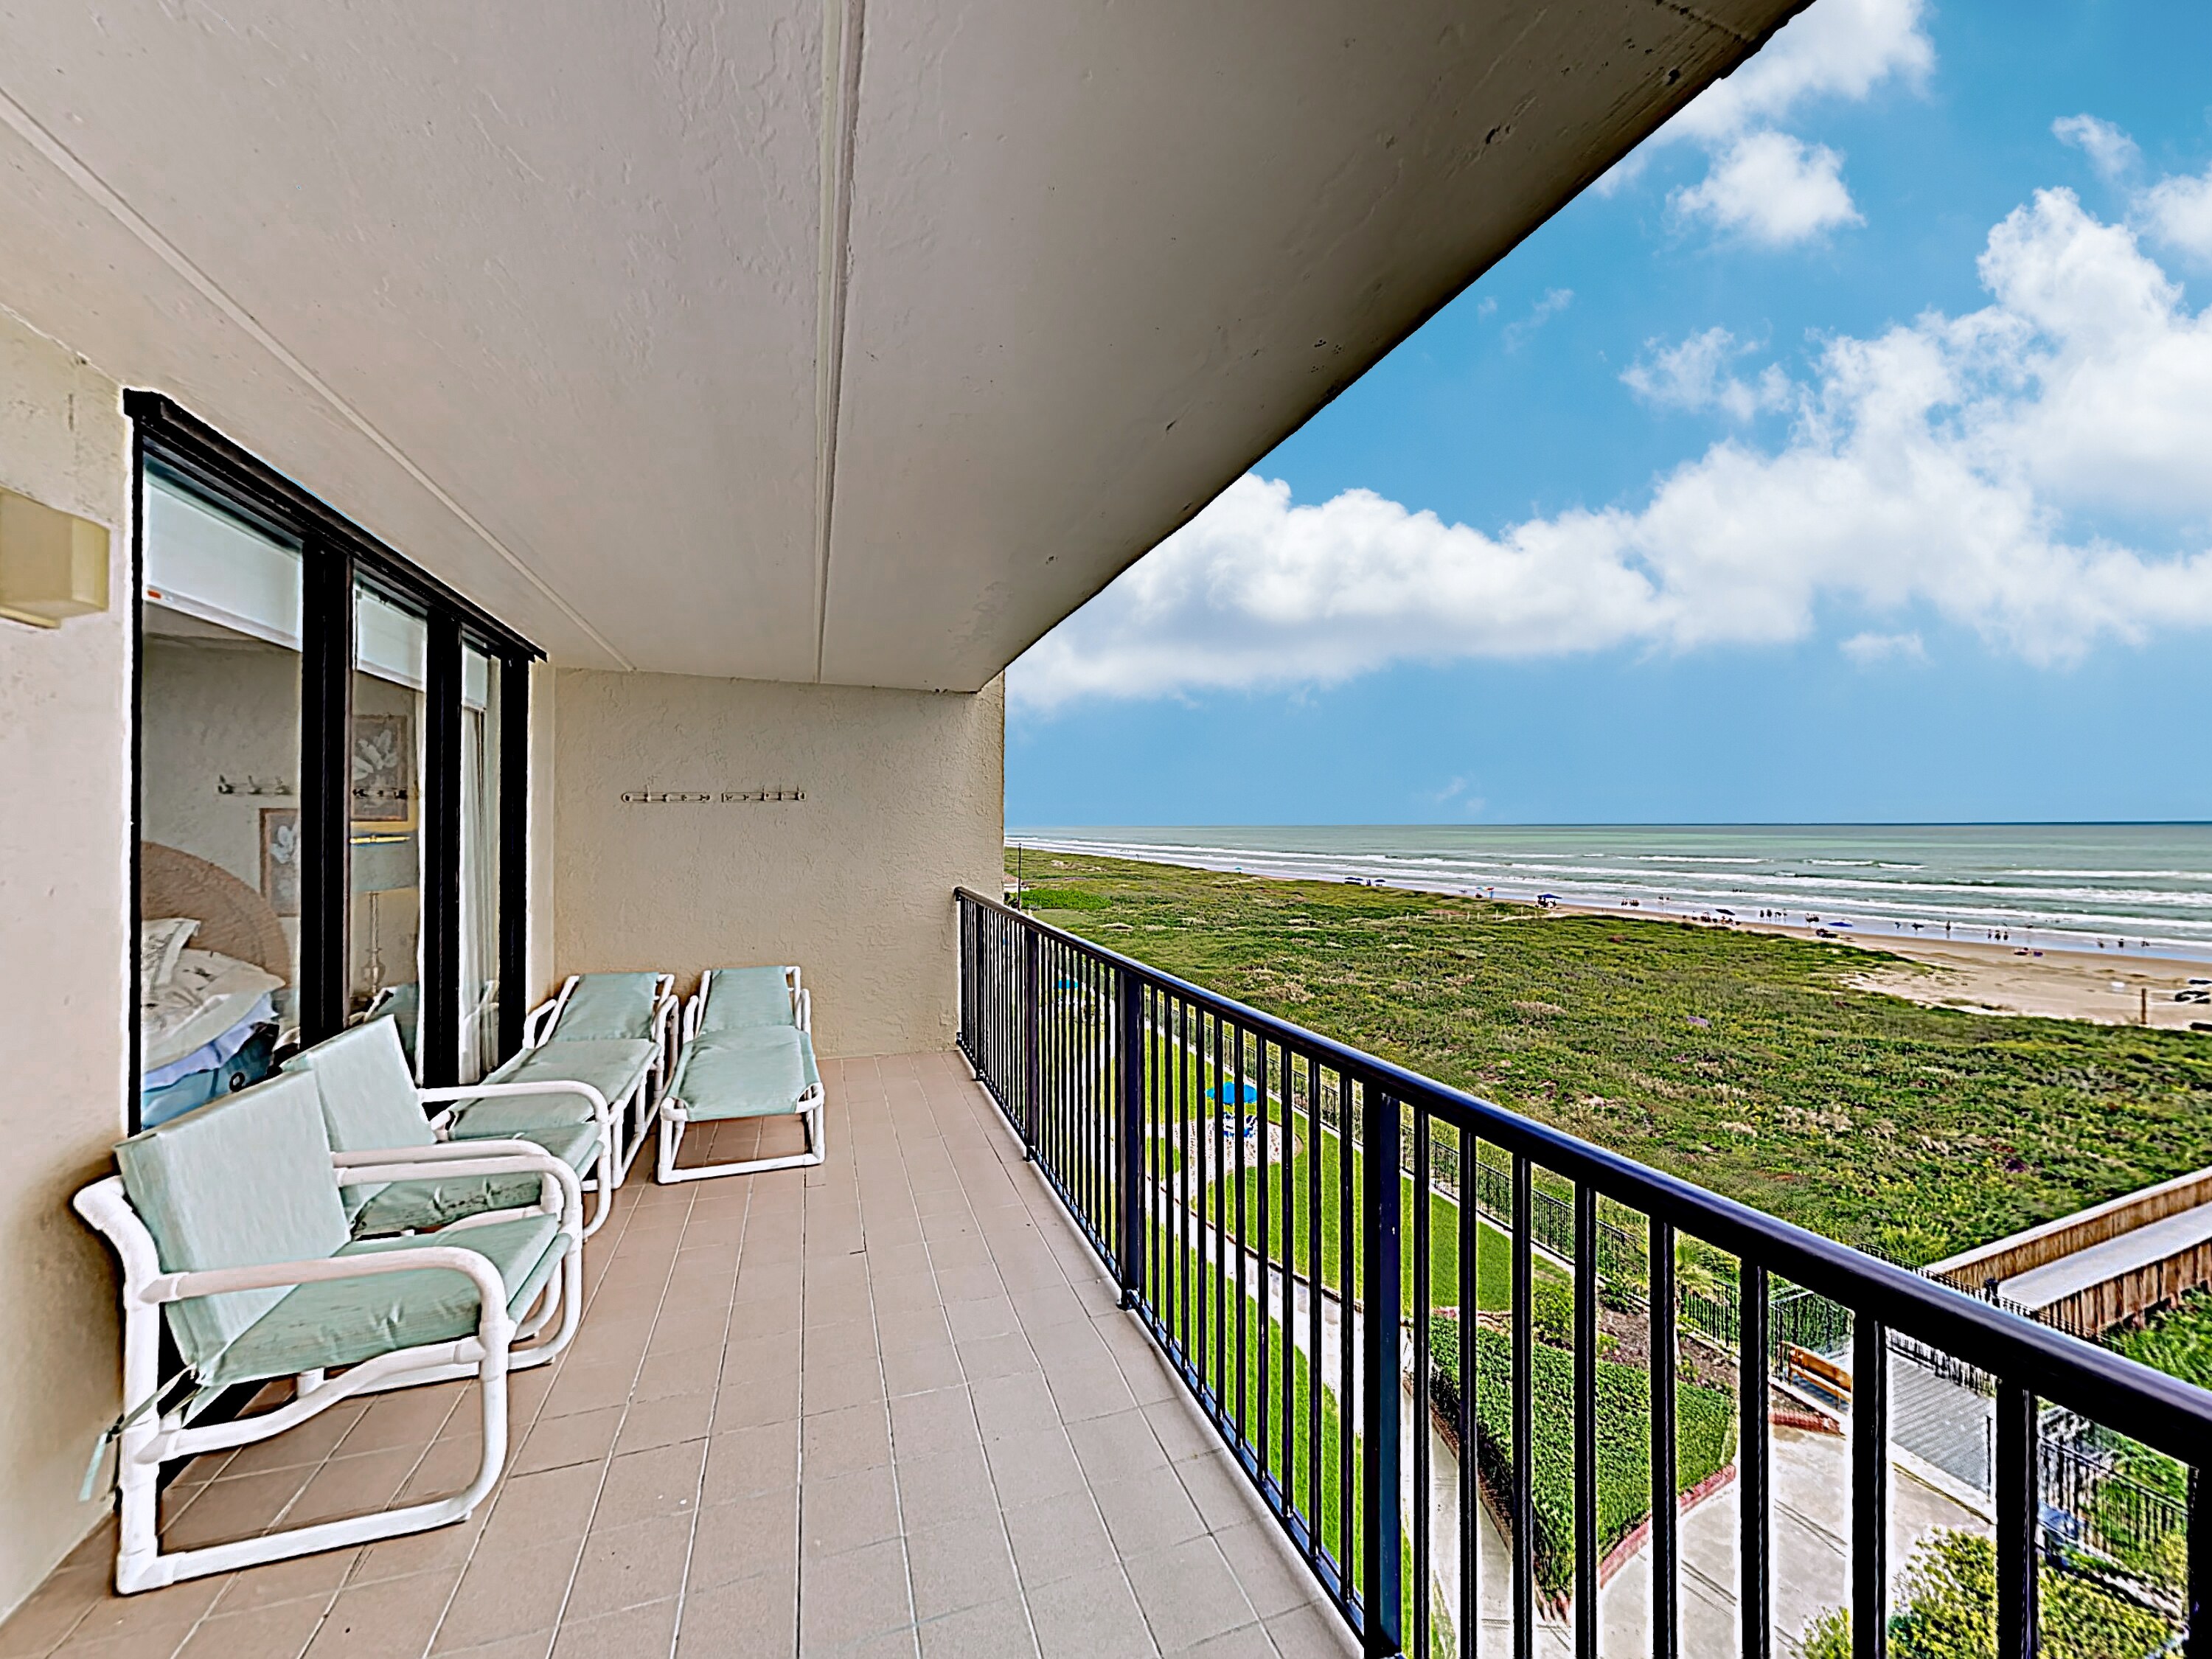 Relish in the coastal air from the privacy of the covered balcony.